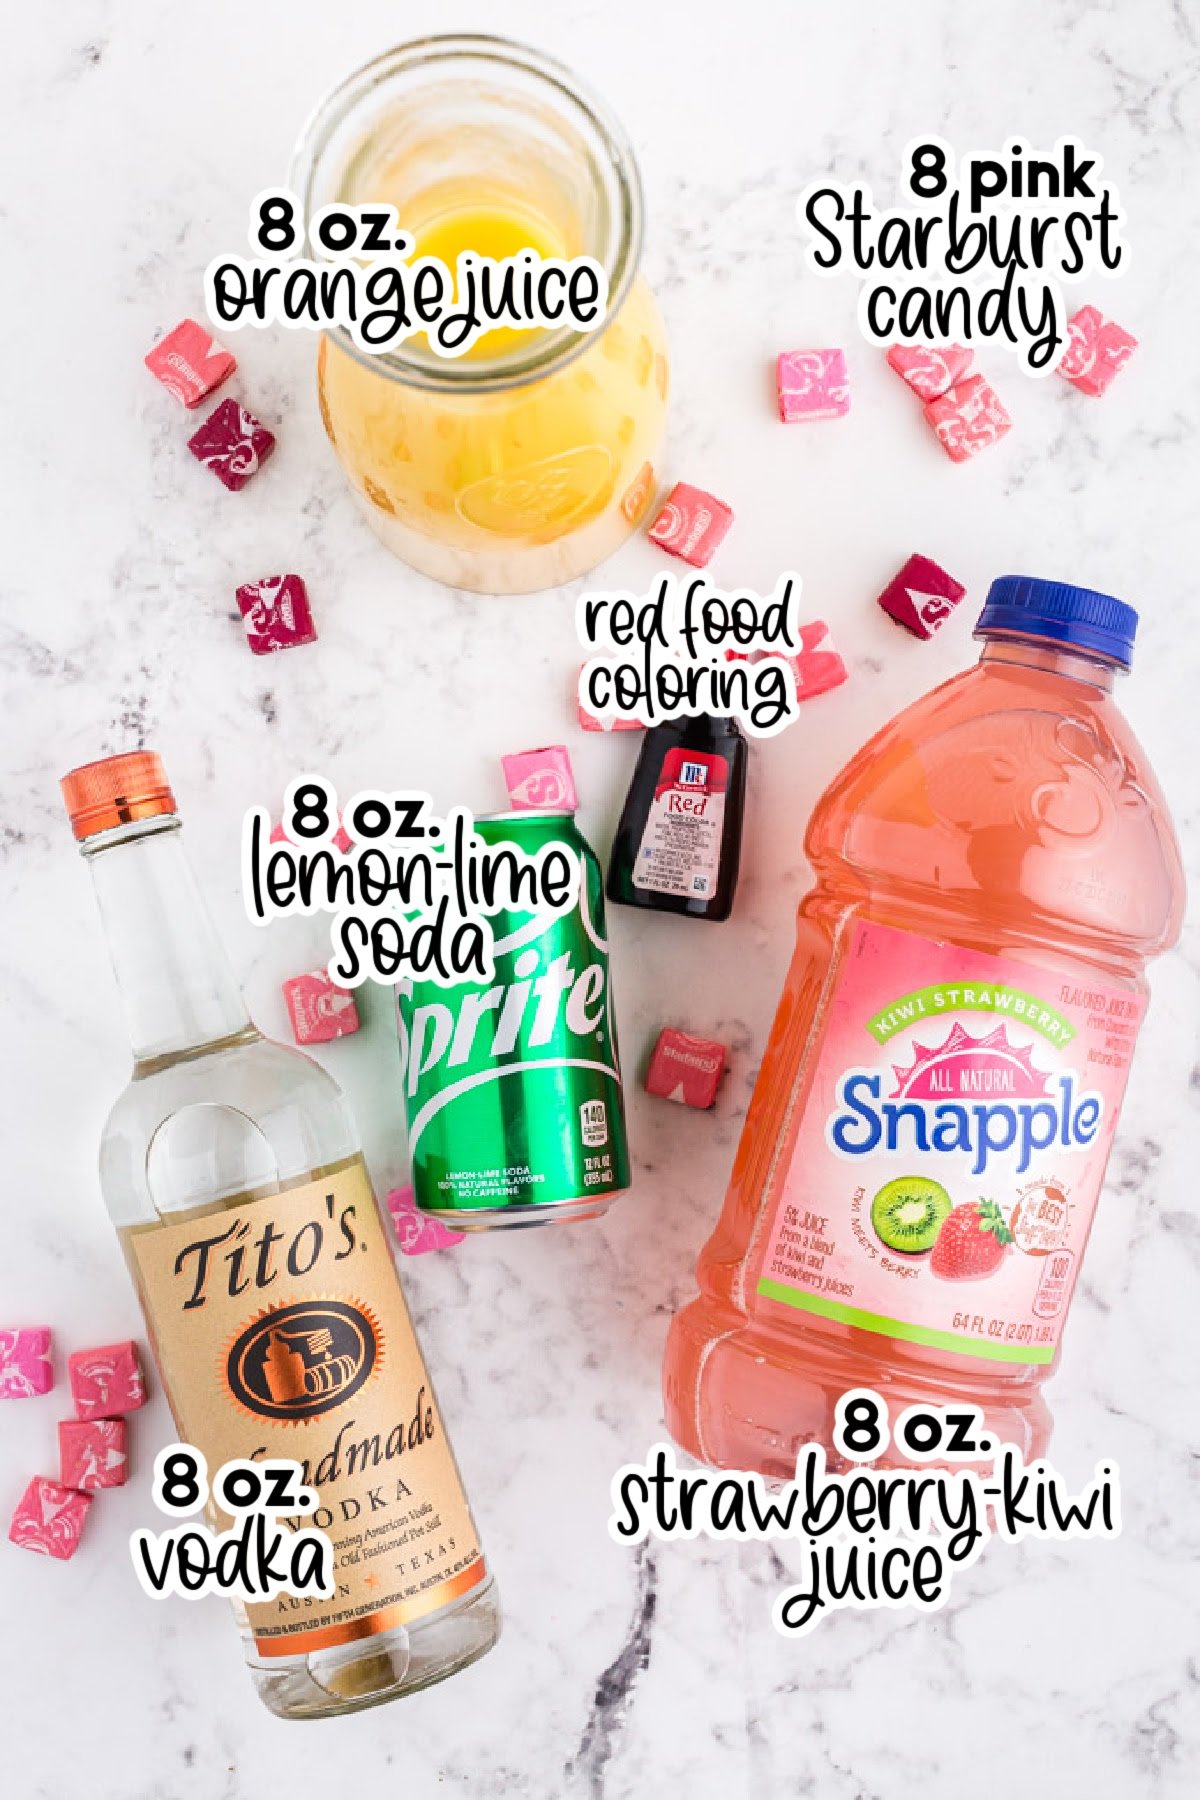 Individual ingredients for pink starburst drink with text and amount labels.